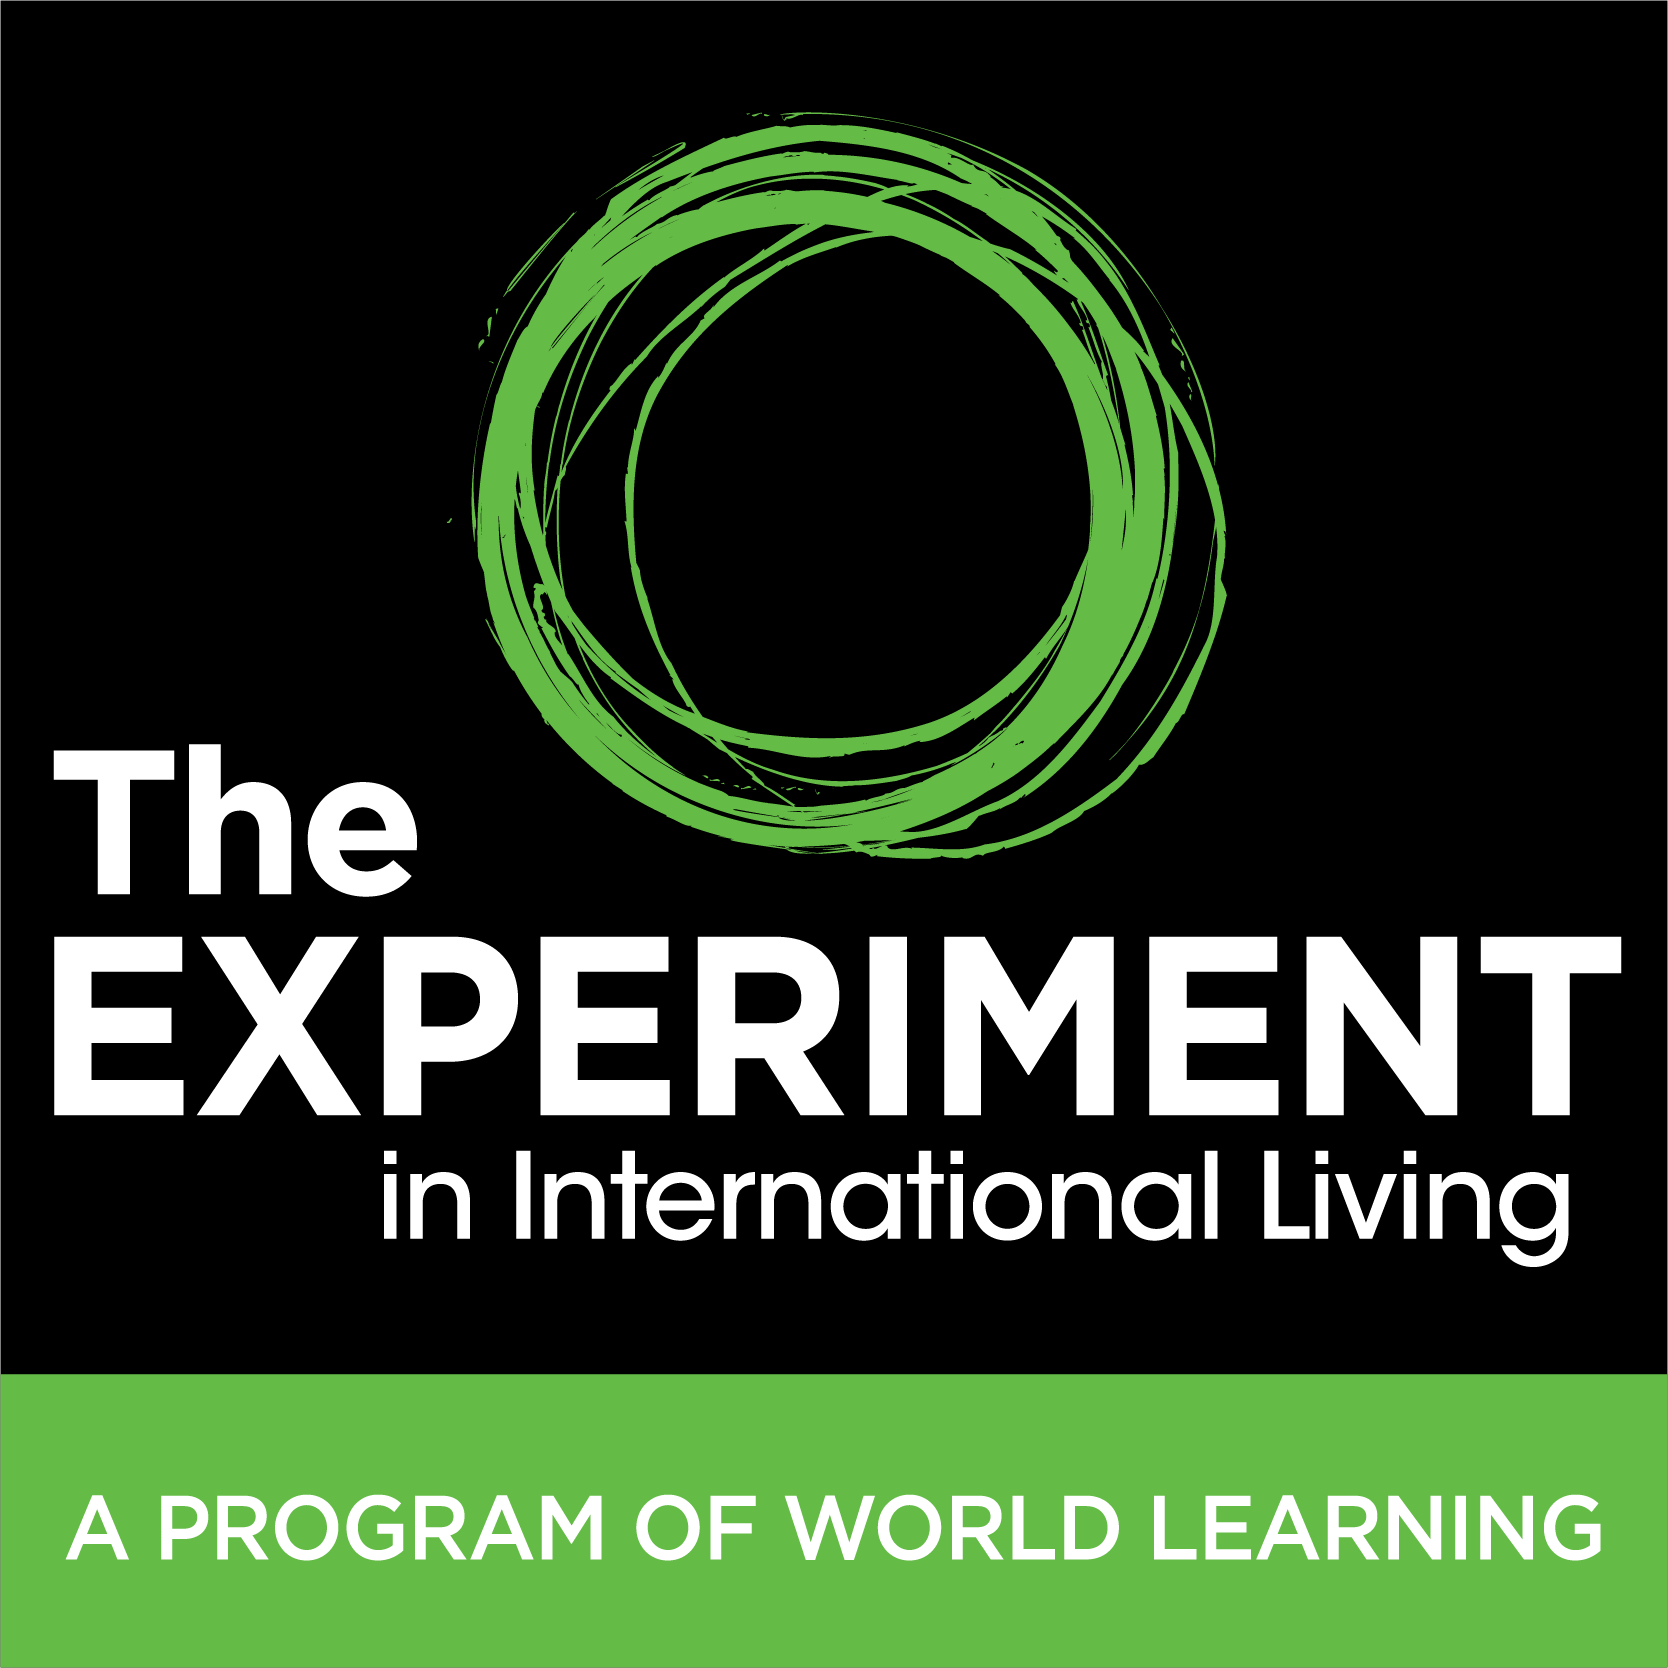 Experiment in International Living - Wikipedia